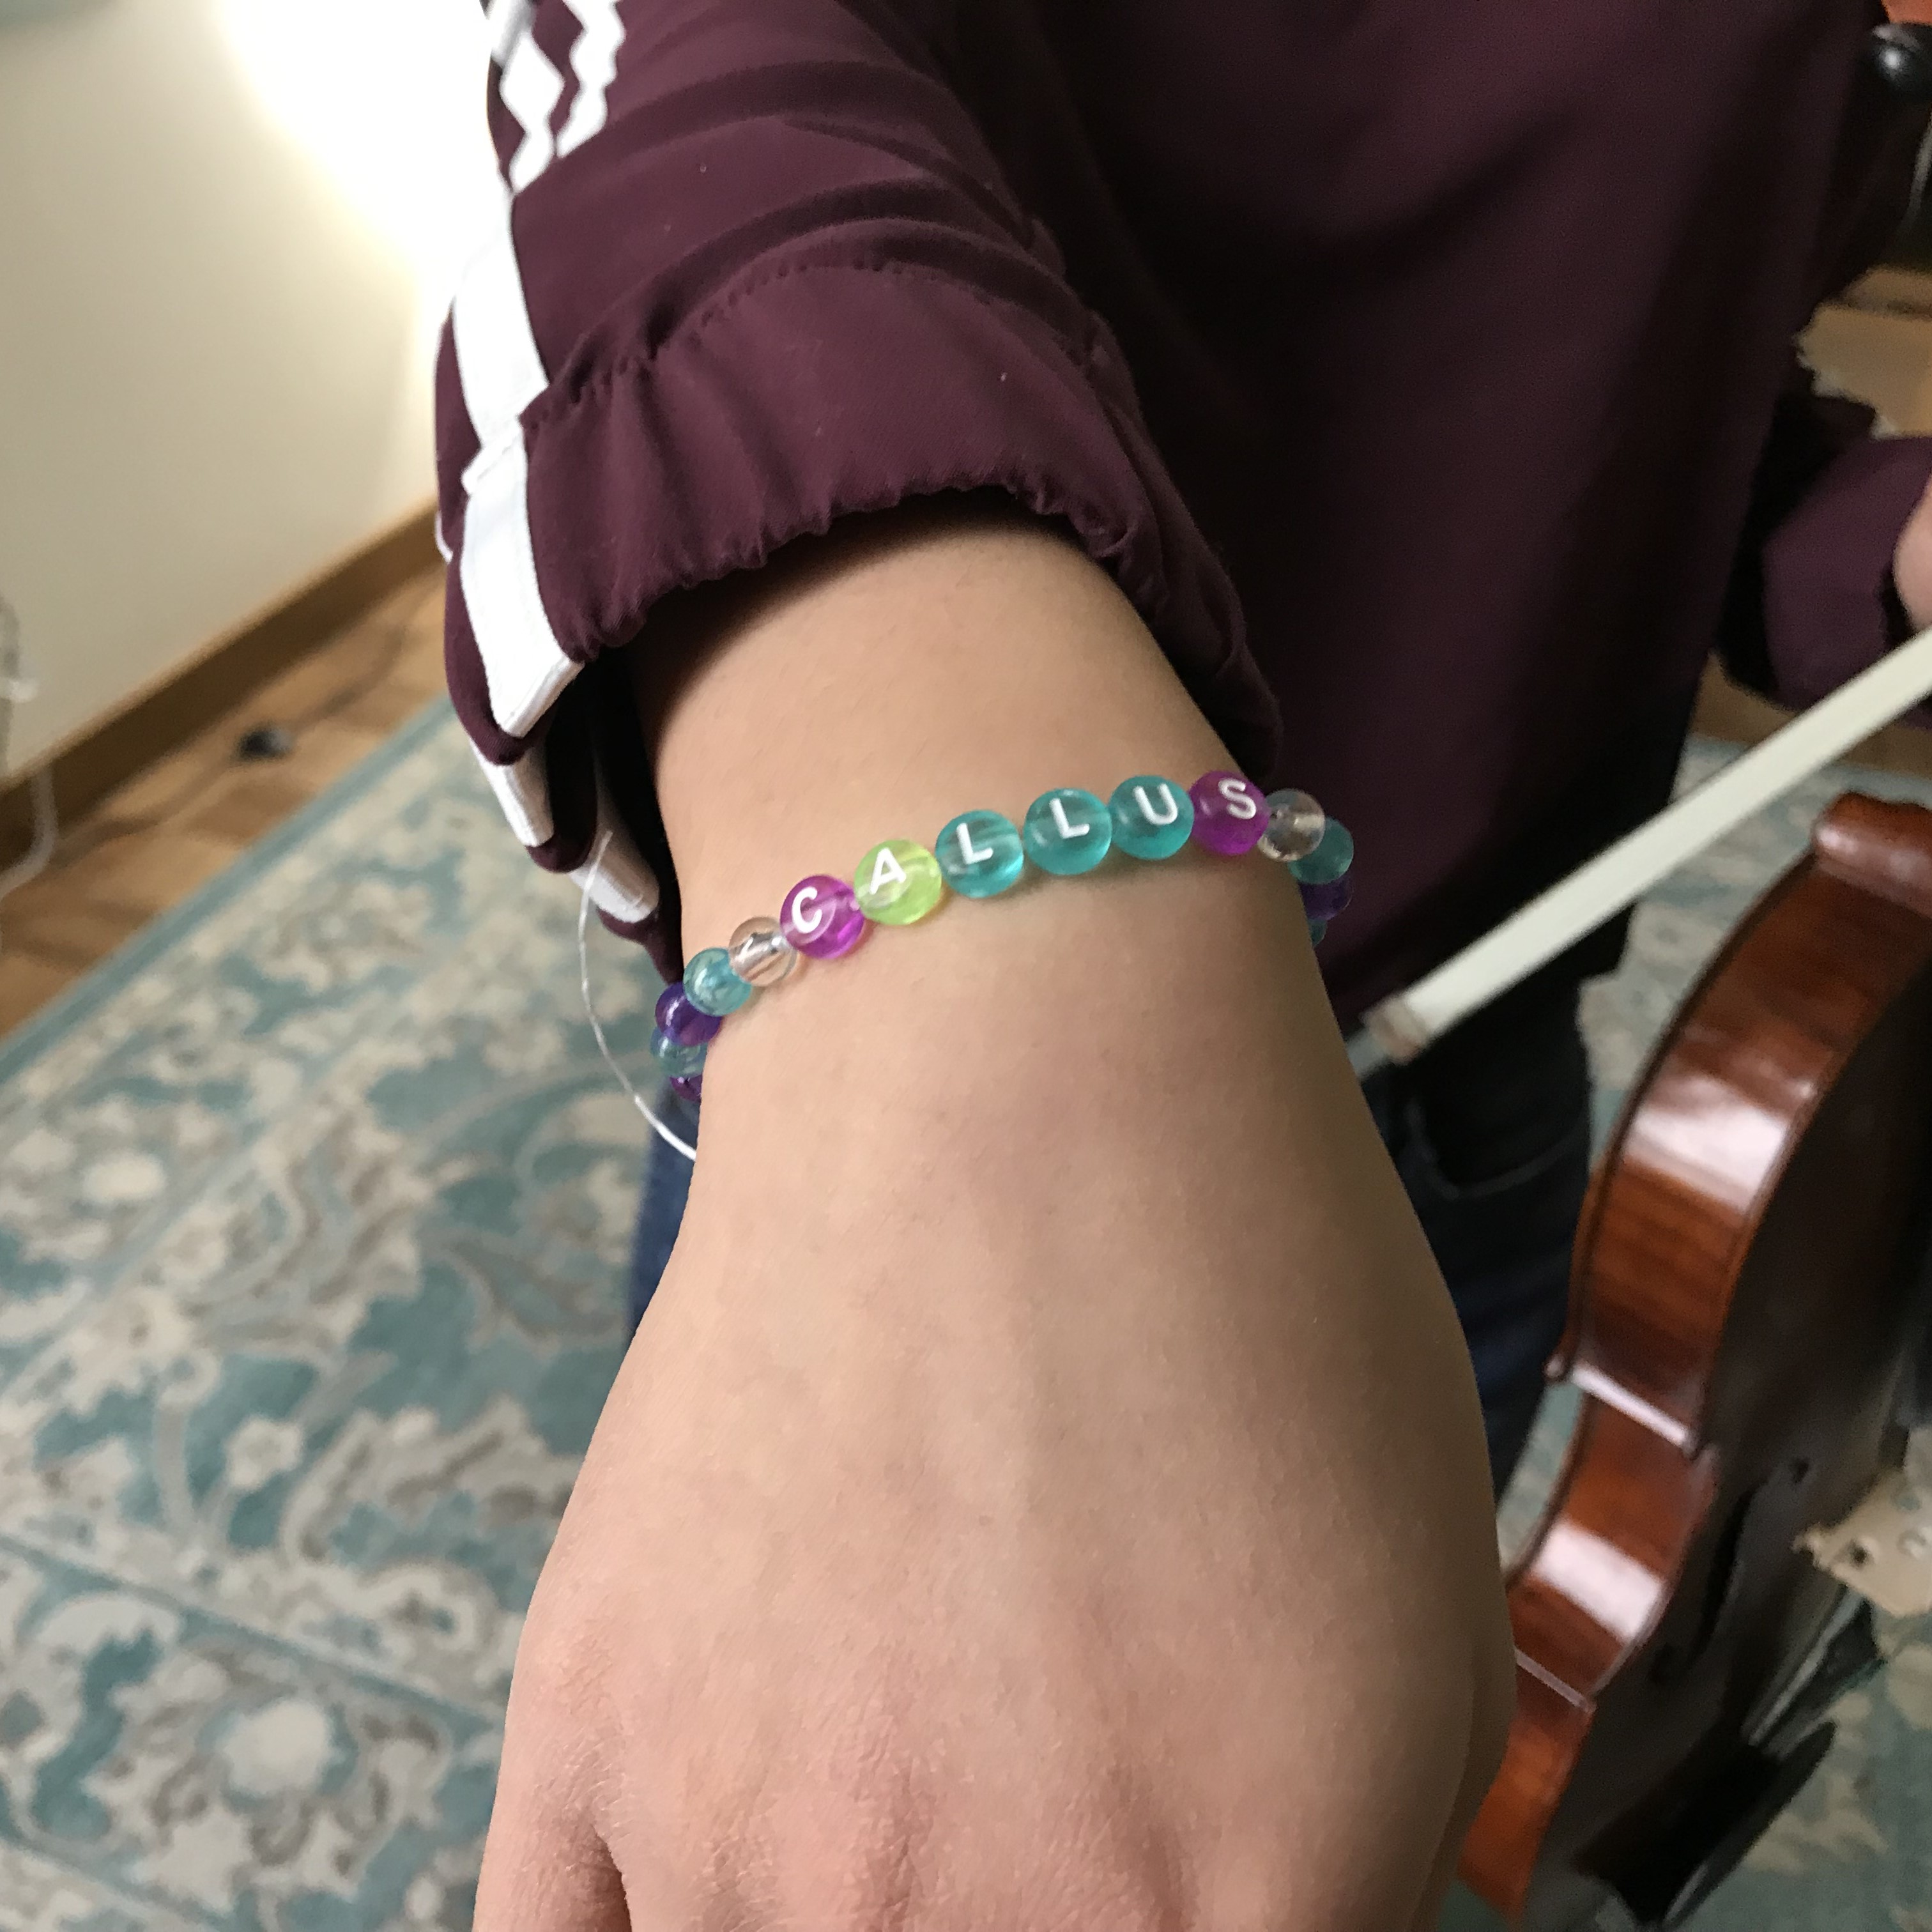 A friendship bracelent made by a student for Prof. Callus